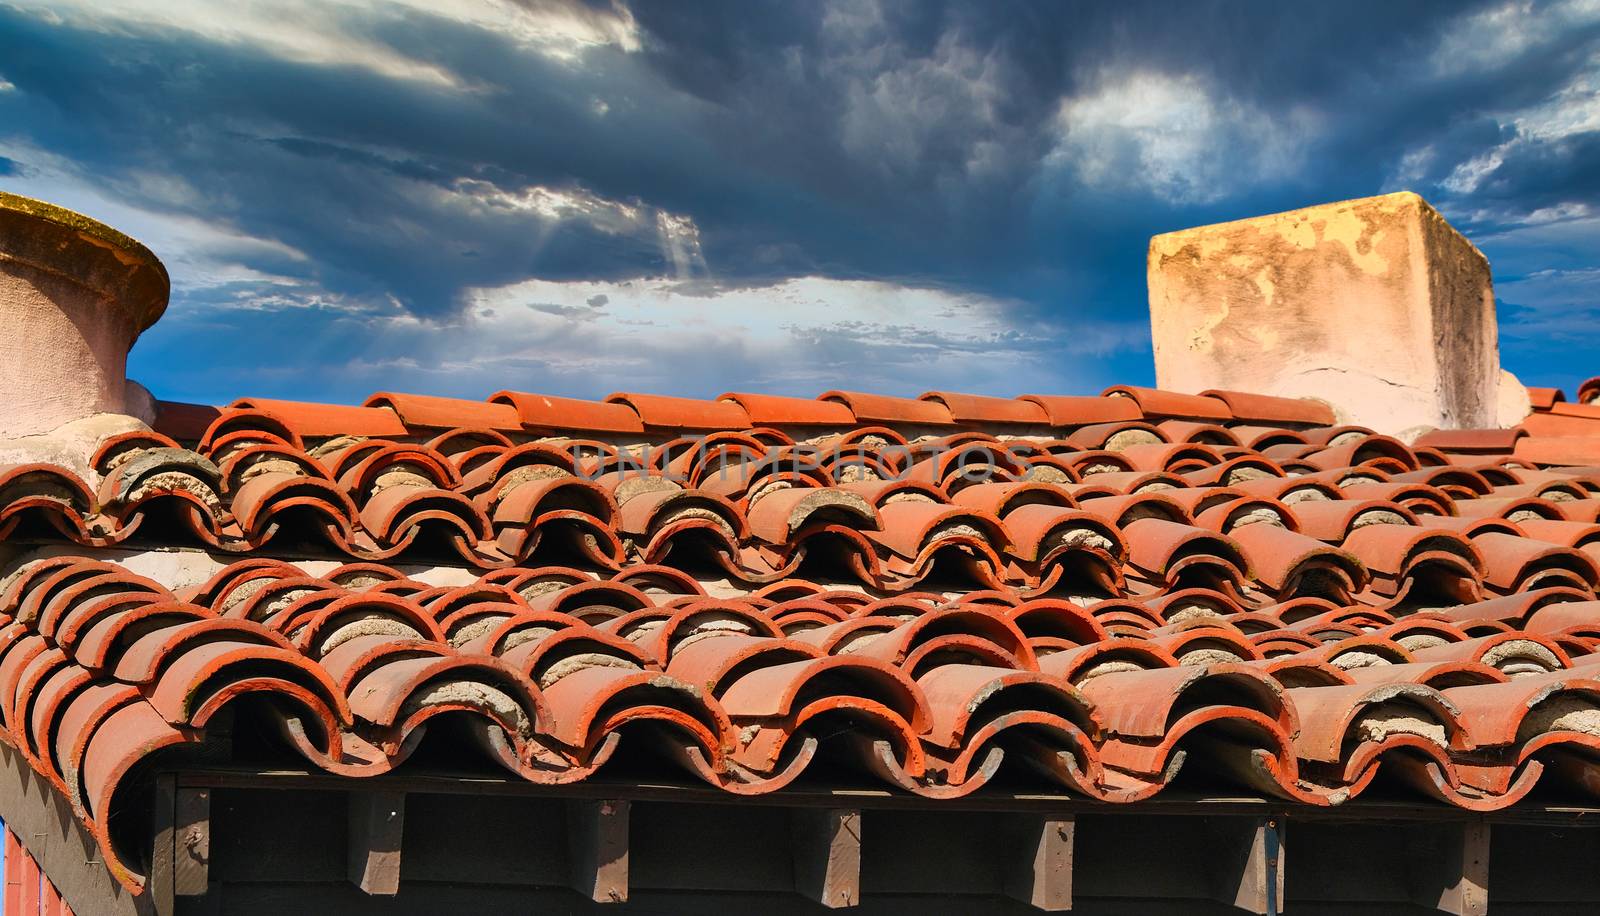 Old Tile Roof by dbvirago